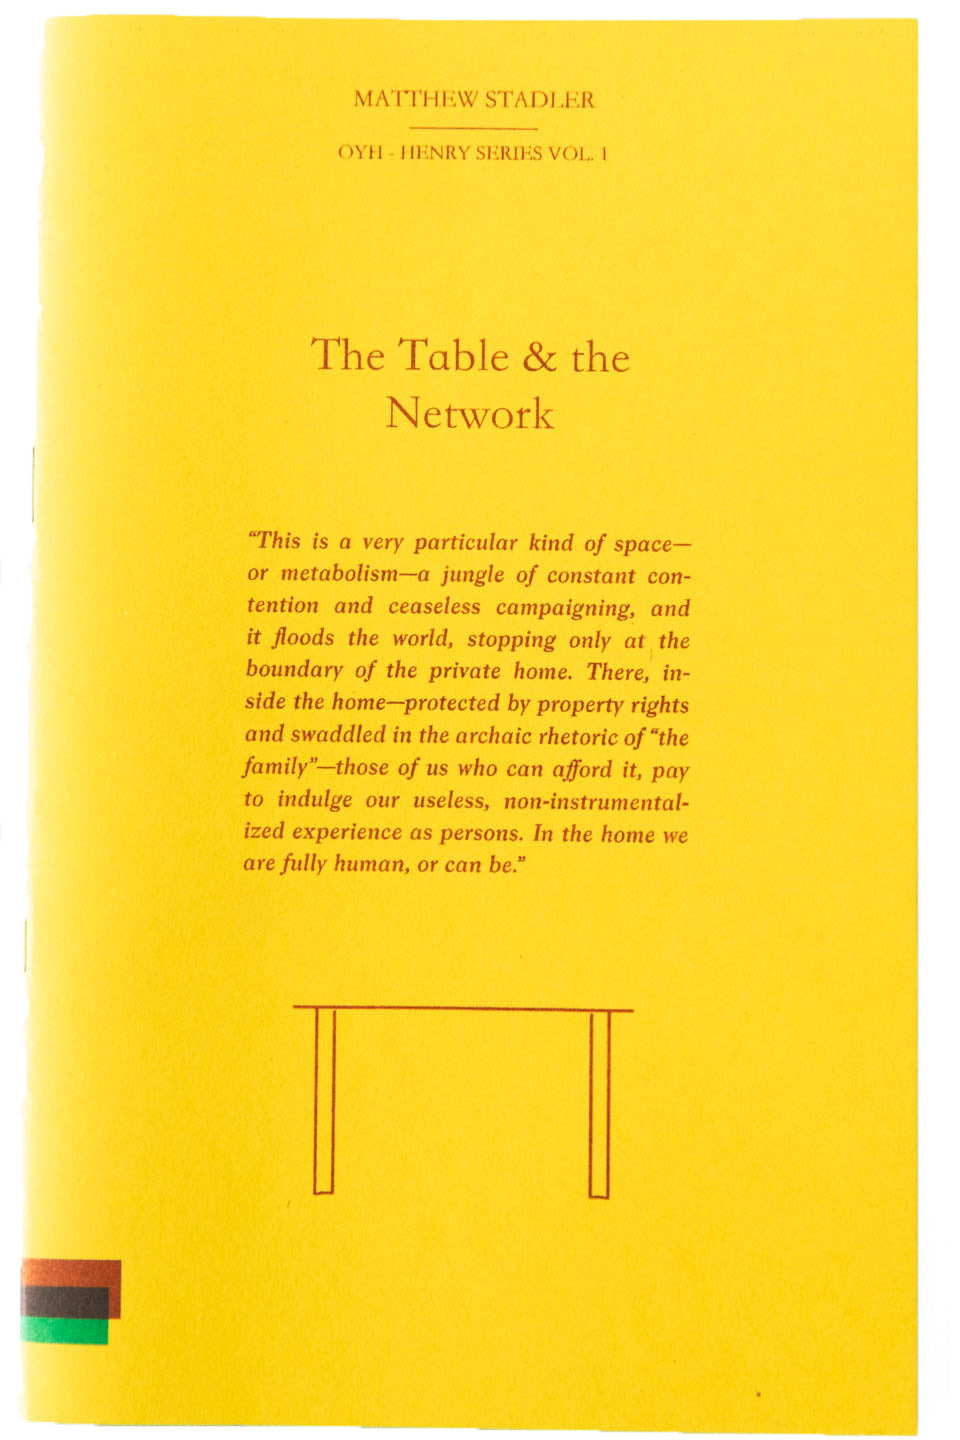 THE TABLE AND THE NETWORK